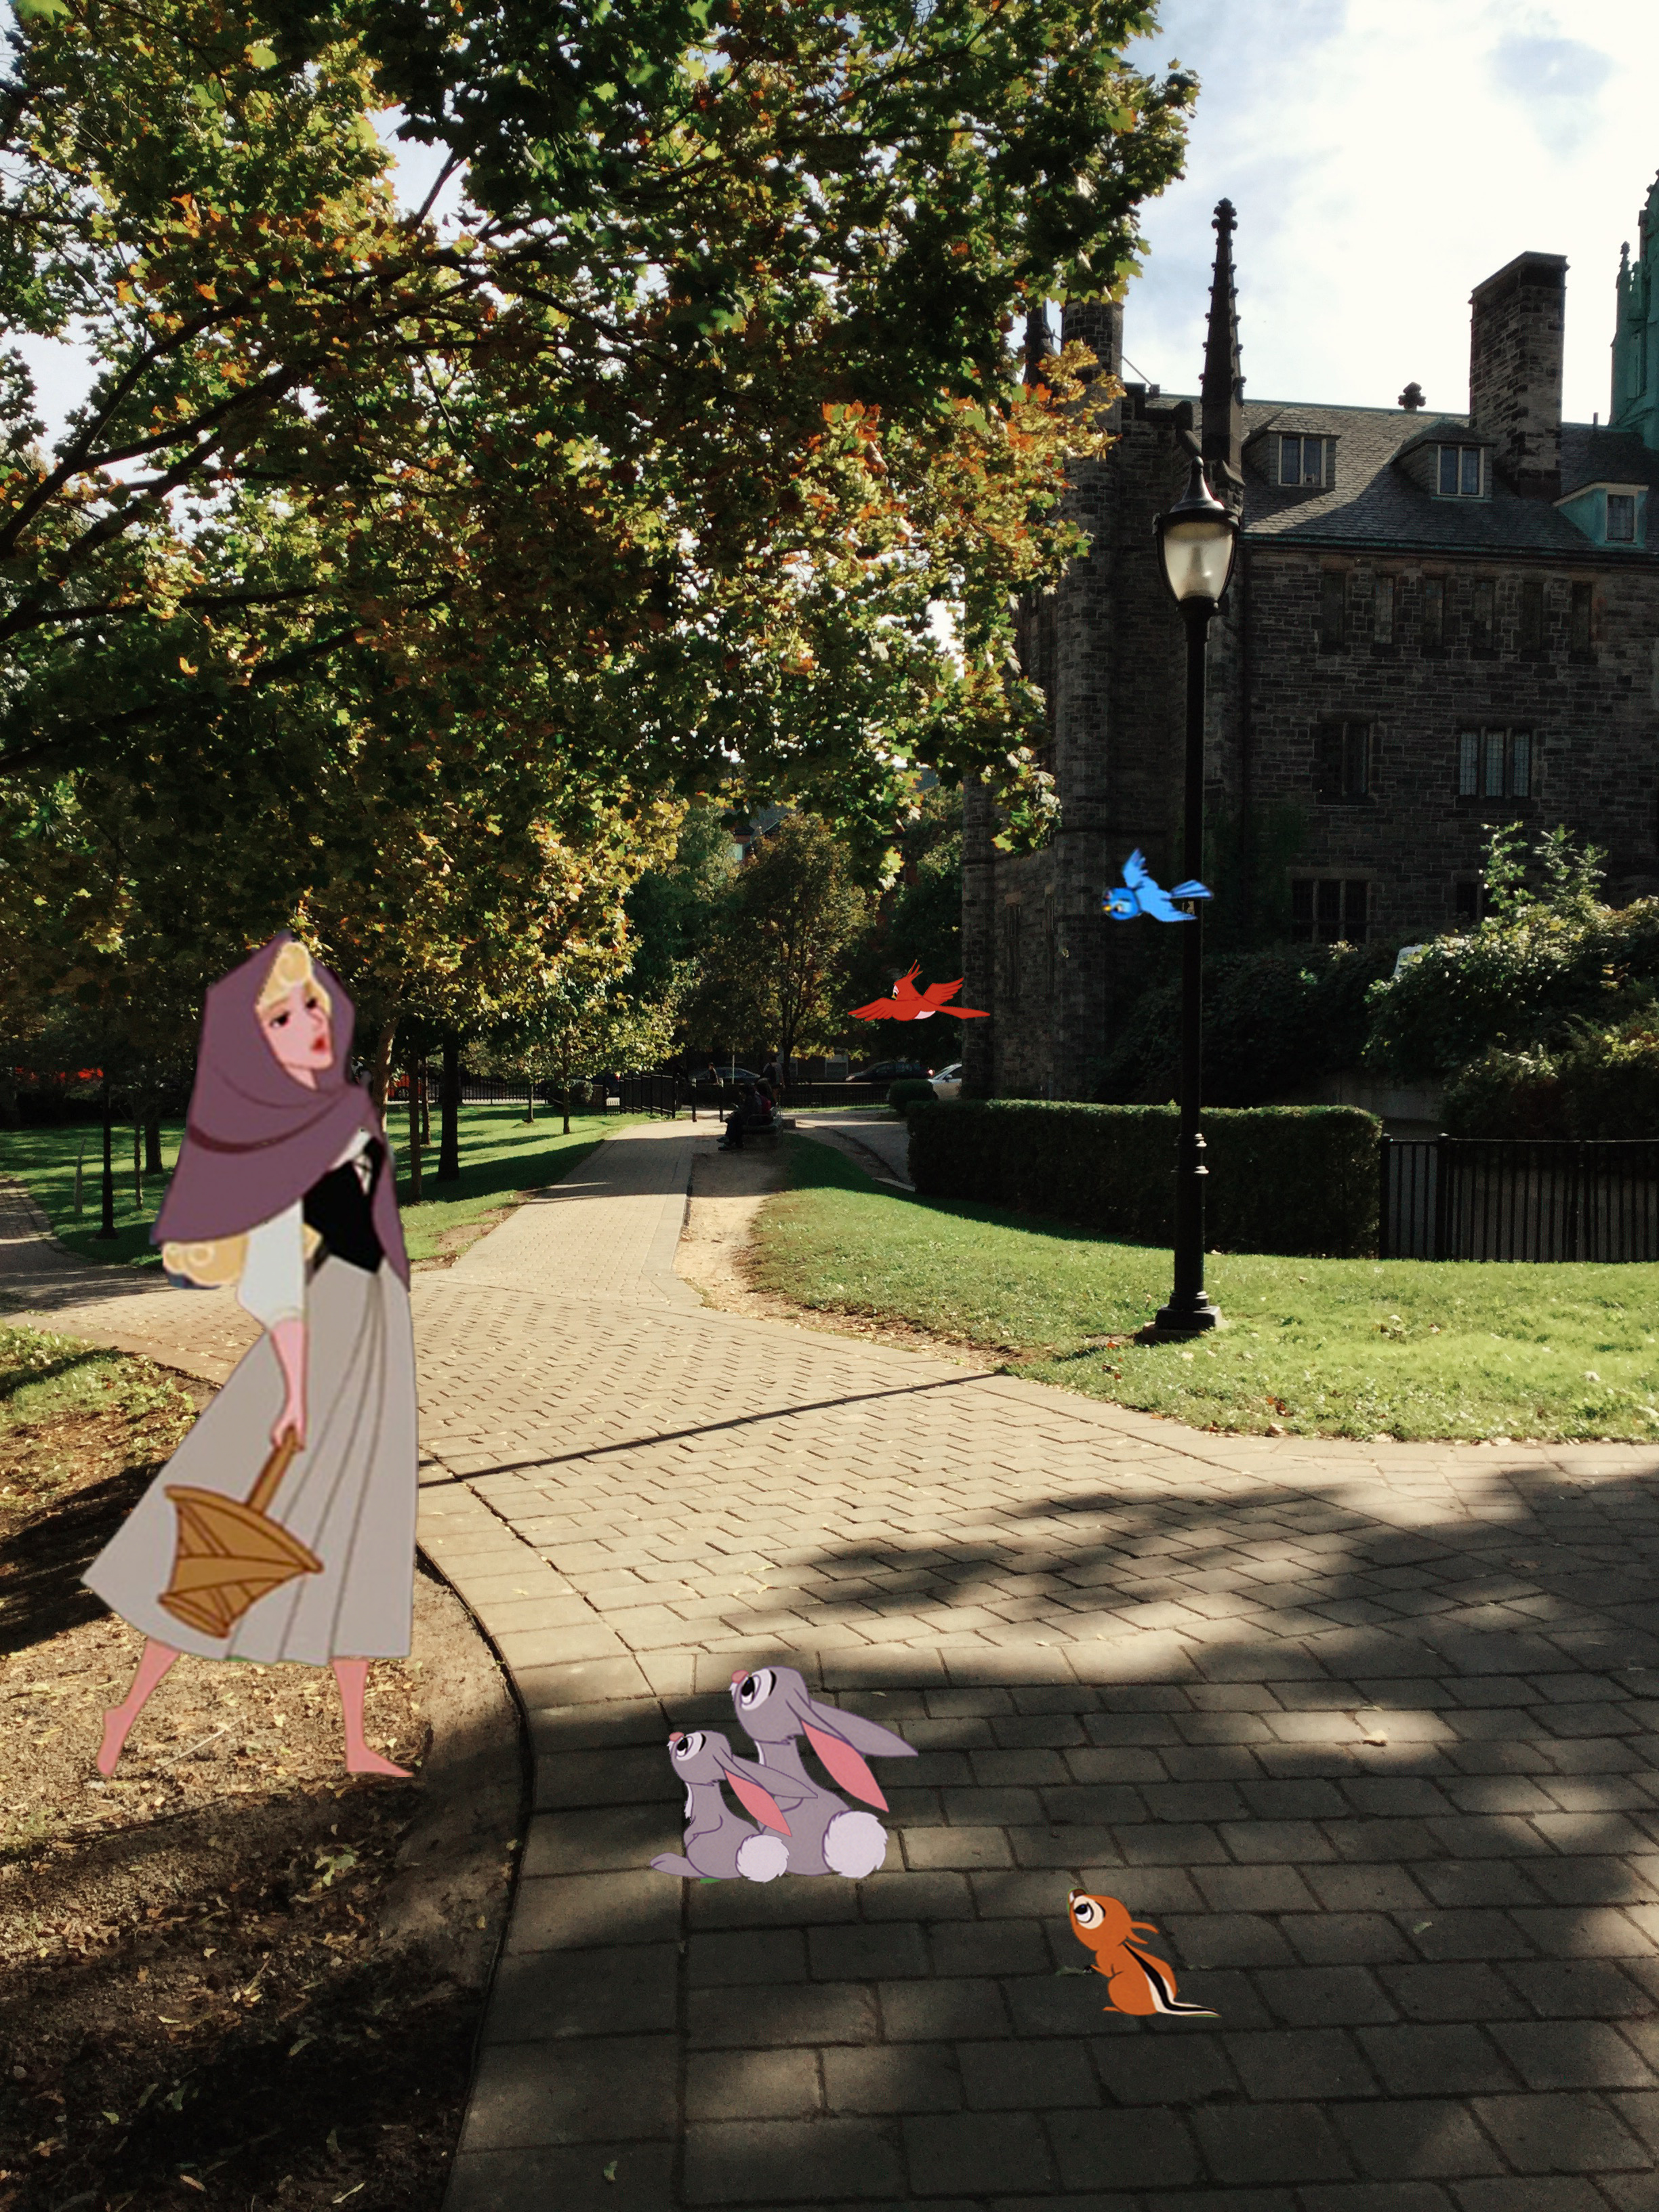 A photo of the path along the Philosophers Walk. I photoshopped Aurora from the Disney version of Sleeping Beauty walking along the foreground, along with a few friends including birds, bunnies, and chipmunks.